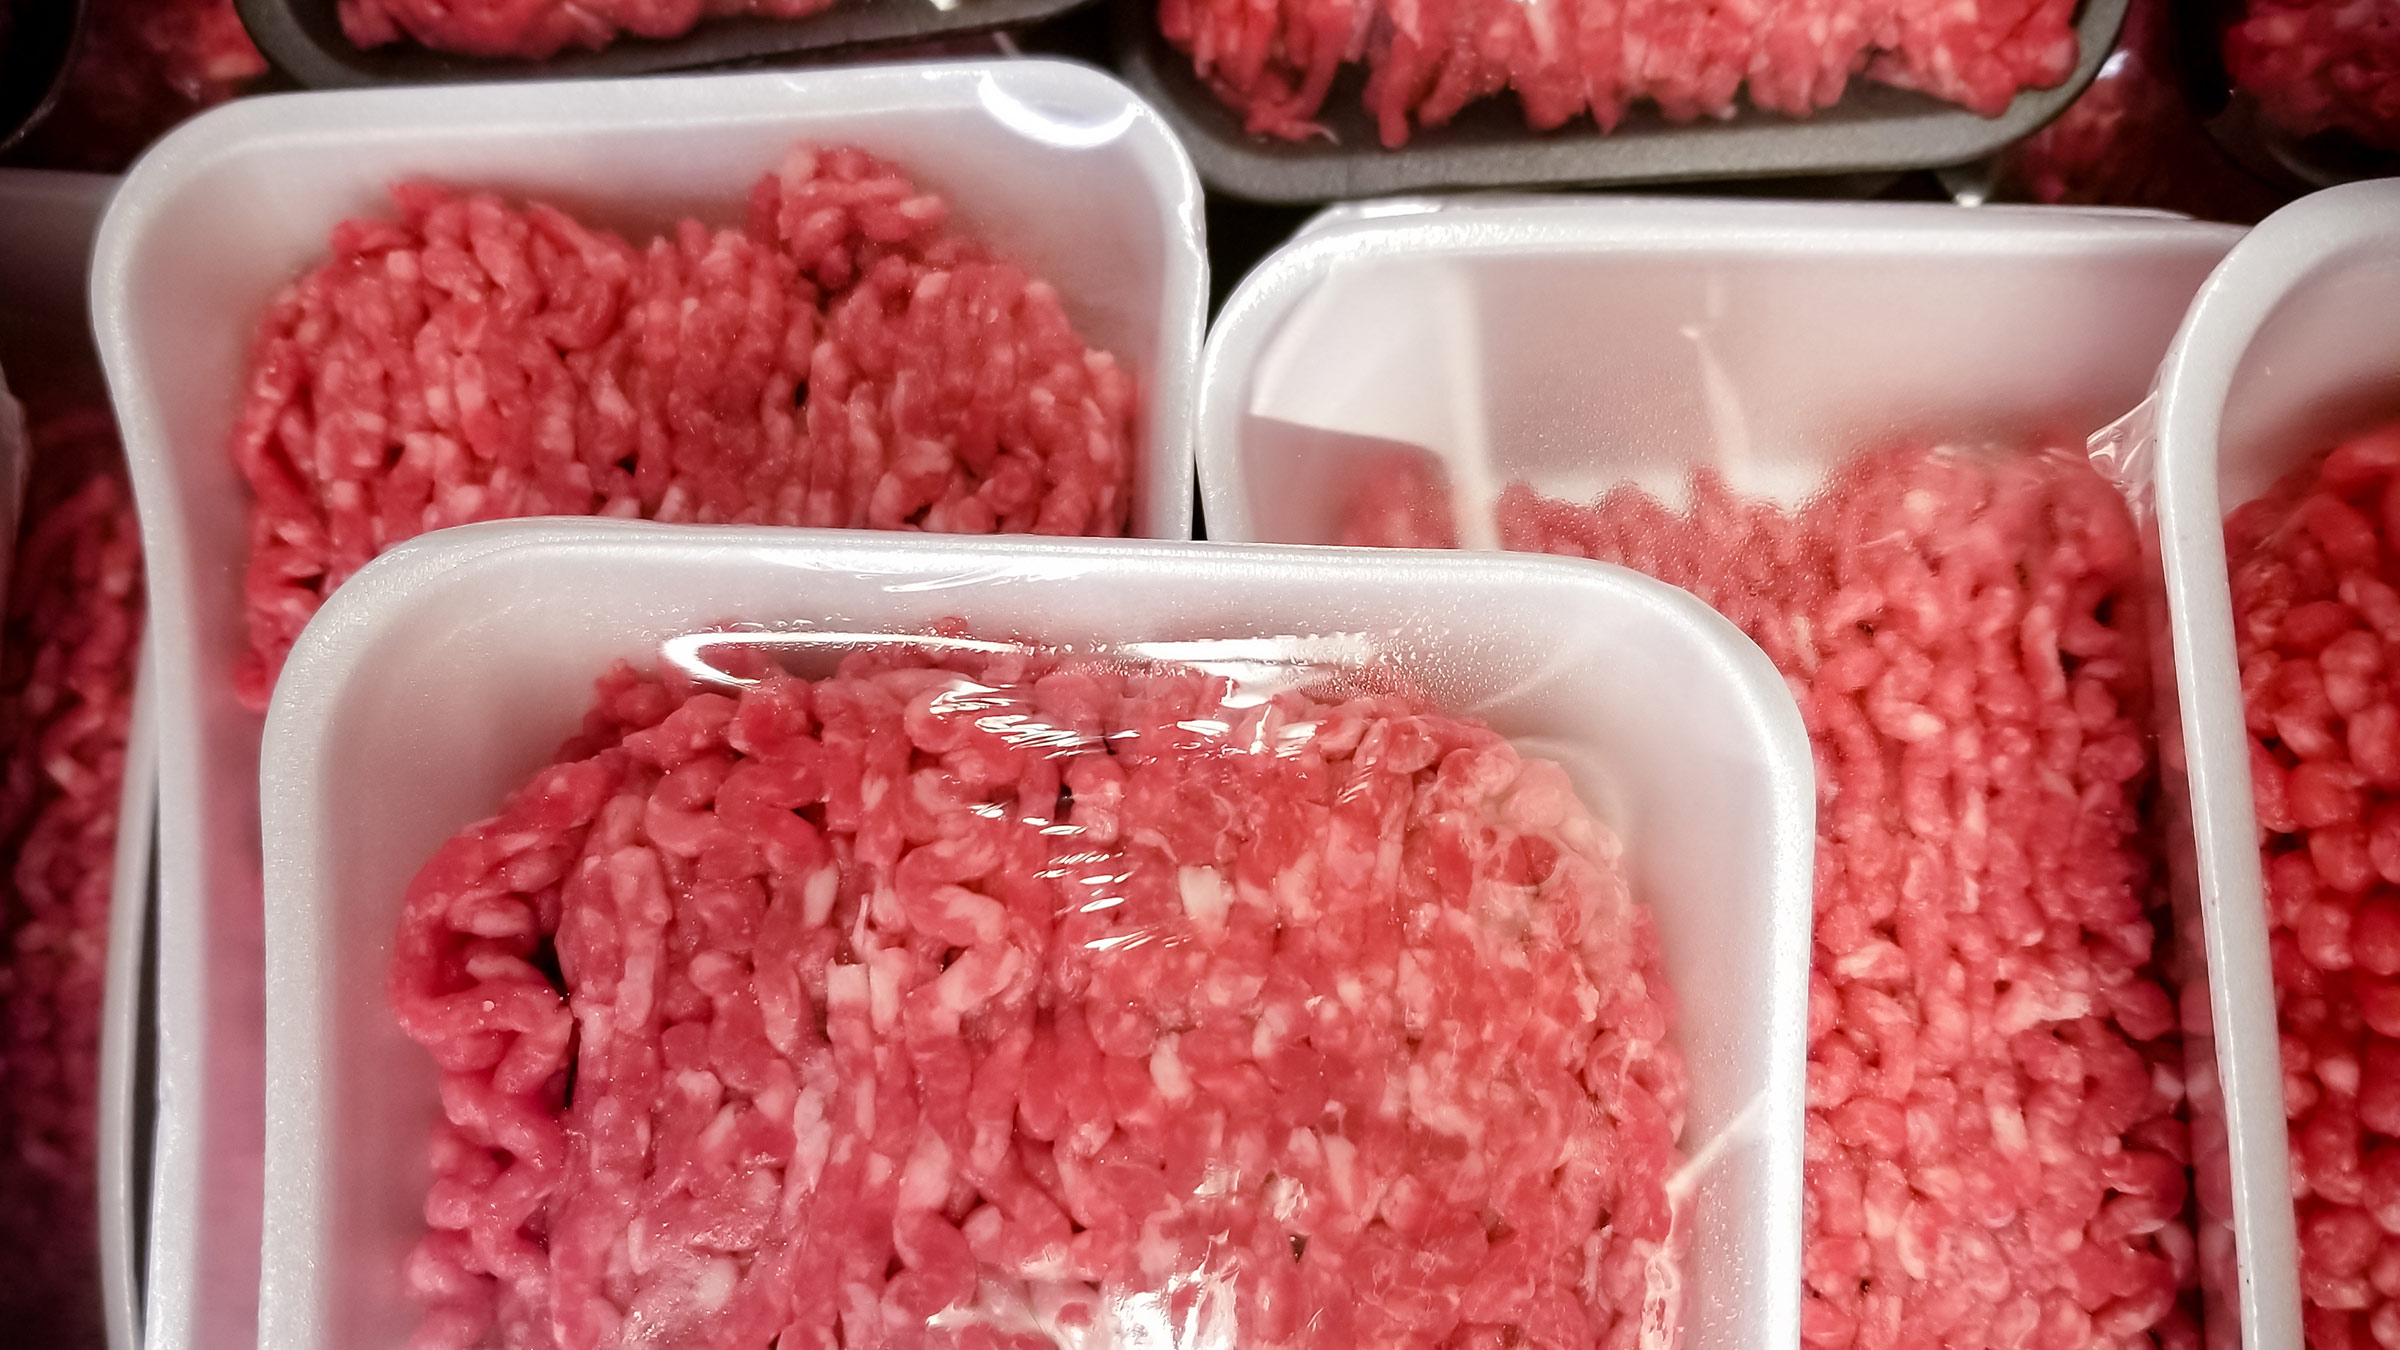 What To Know About The Nationwide Recall Of Certain Ground Beef Products Sold At Walmart